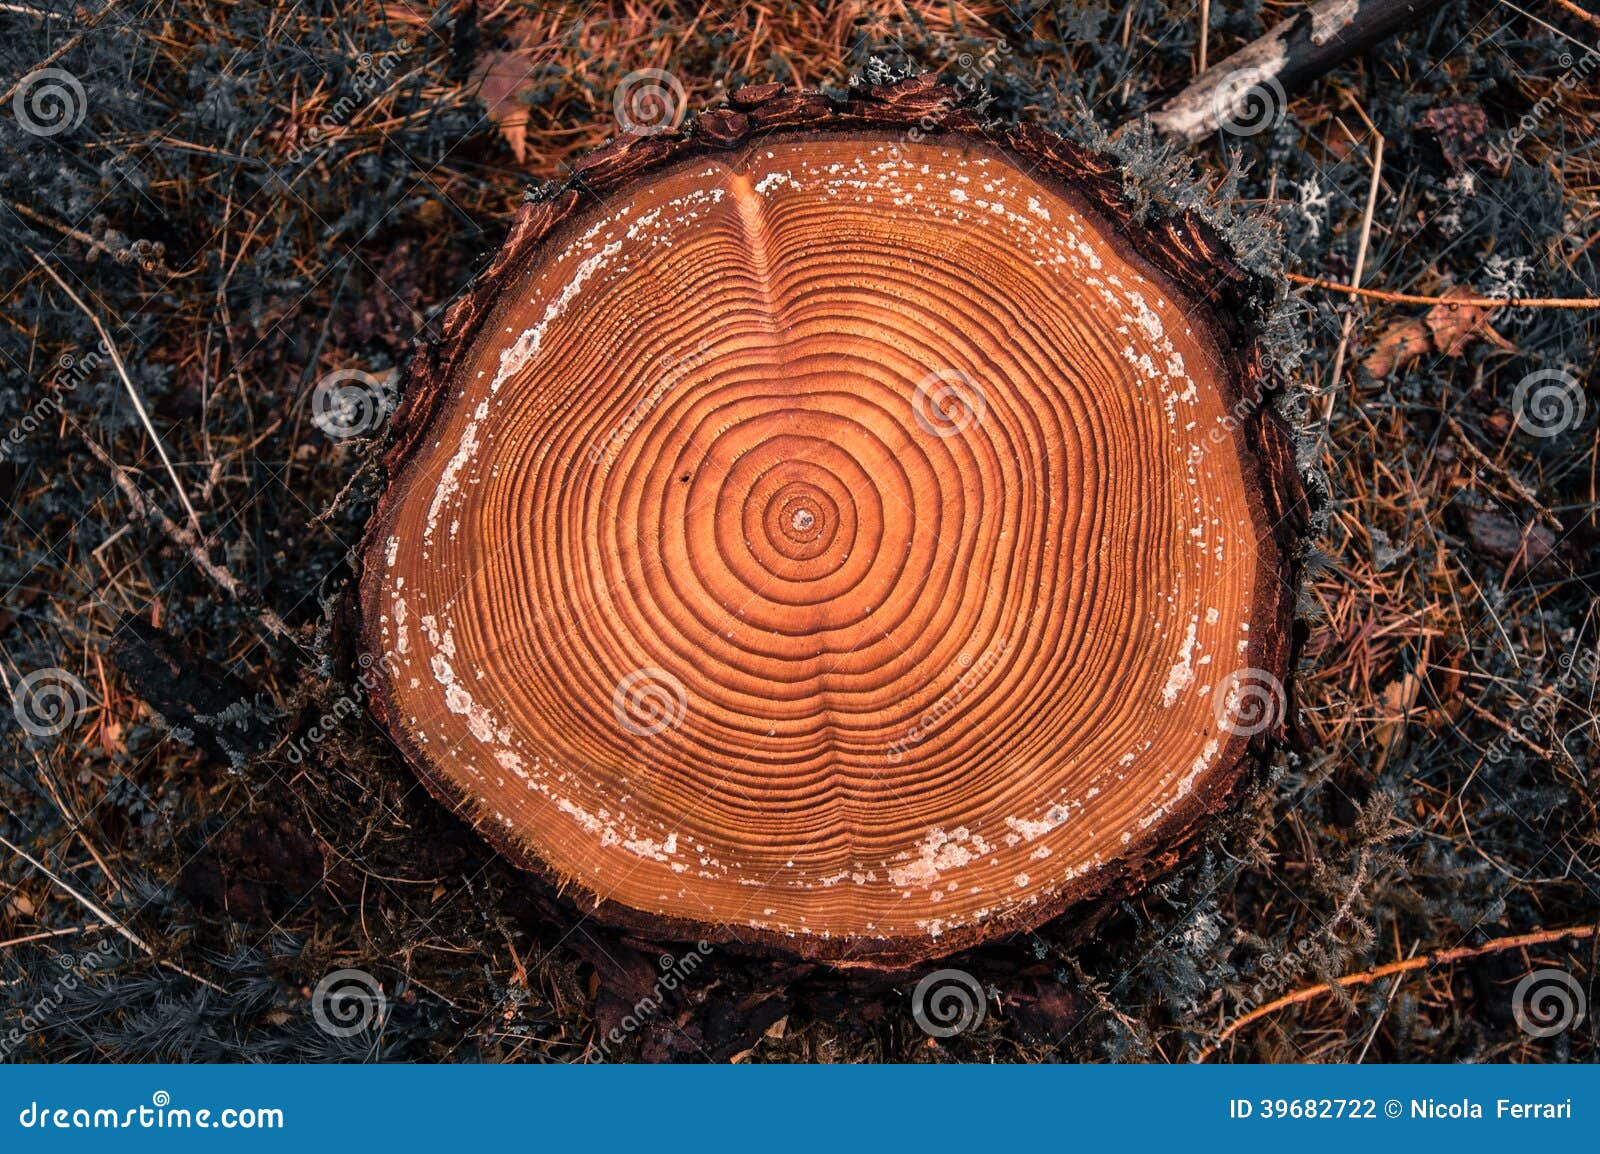 tree rings on a cut log in a conifer forest